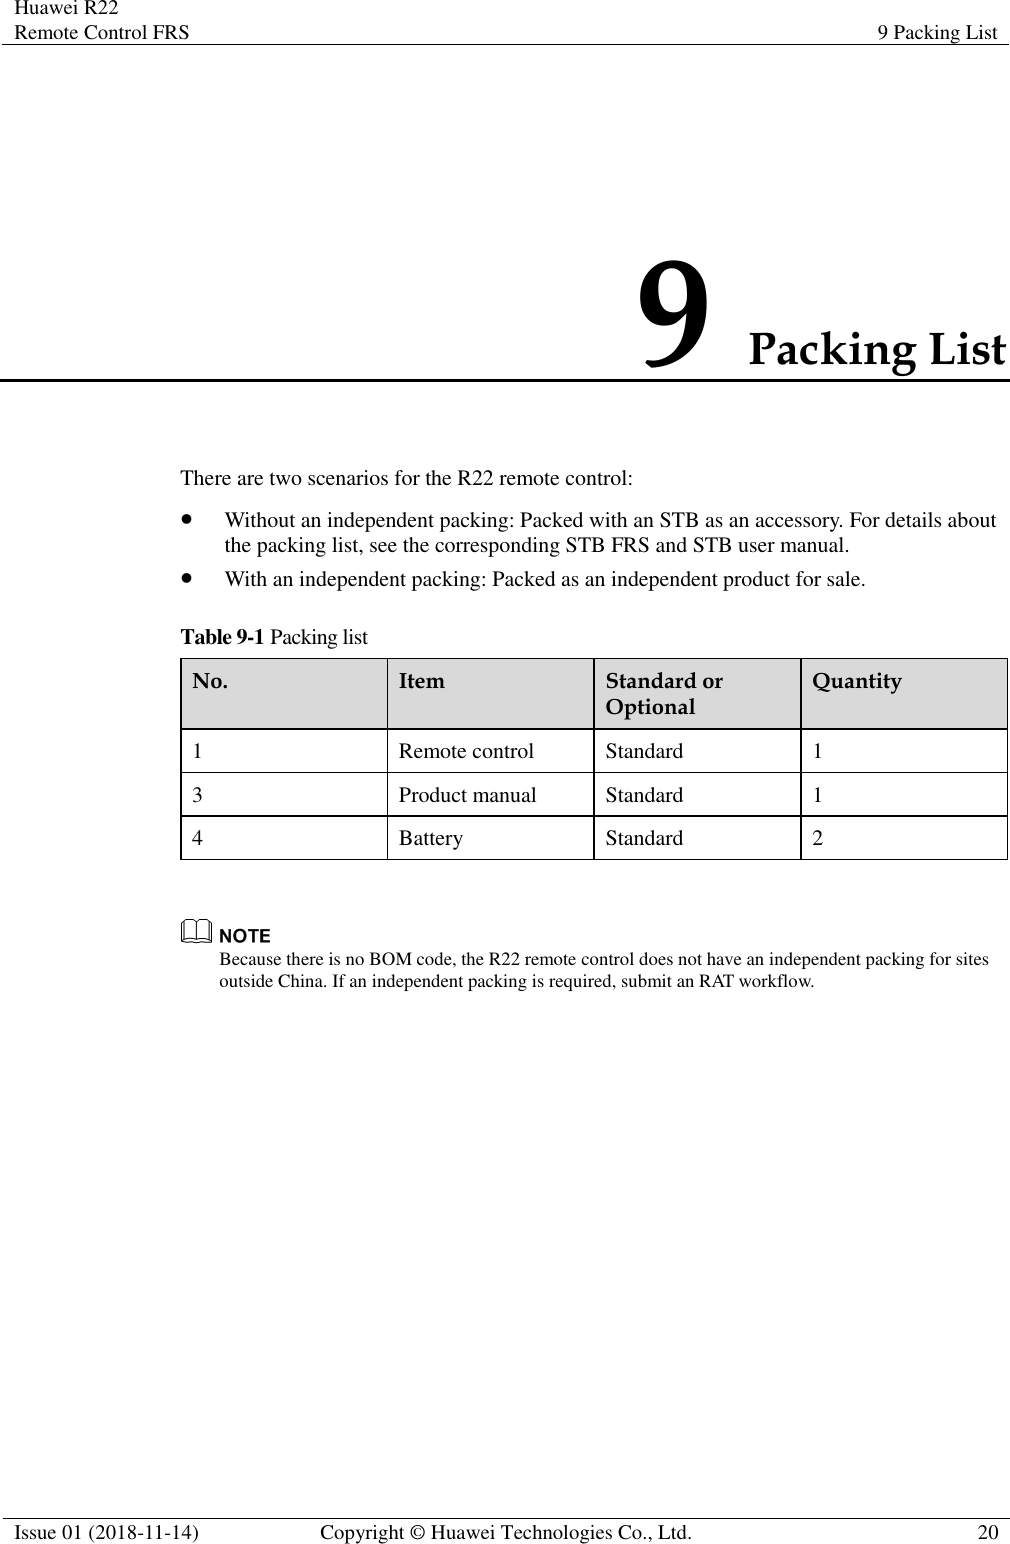 Huawei R22 Remote Control FRS 9 Packing List  Issue 01 (2018-11-14) Copyright © Huawei Technologies Co., Ltd. 20  9 Packing List There are two scenarios for the R22 remote control: ⚫ Without an independent packing: Packed with an STB as an accessory. For details about the packing list, see the corresponding STB FRS and STB user manual. ⚫ With an independent packing: Packed as an independent product for sale. Table 9-1 Packing list No. Item Standard or Optional Quantity 1 Remote control Standard 1 3 Product manual Standard 1 4 Battery Standard 2   Because there is no BOM code, the R22 remote control does not have an independent packing for sites outside China. If an independent packing is required, submit an RAT workflow. 